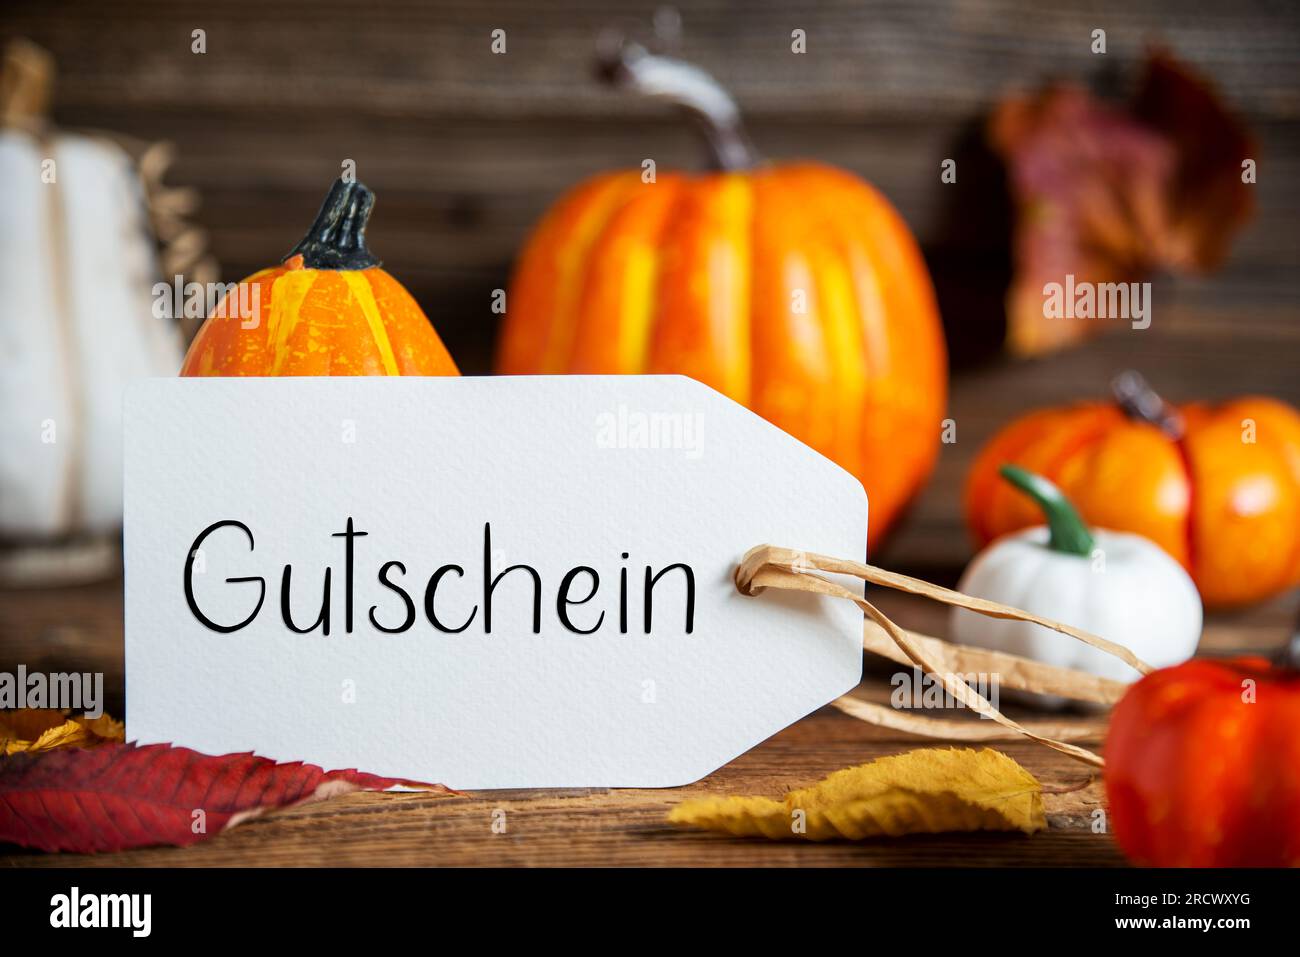 Autumn Decoration With Orange Pumpkins, Rustic fall Decoration With Label With German Text Gutschein, Which Means Voucher in English Stock Photo